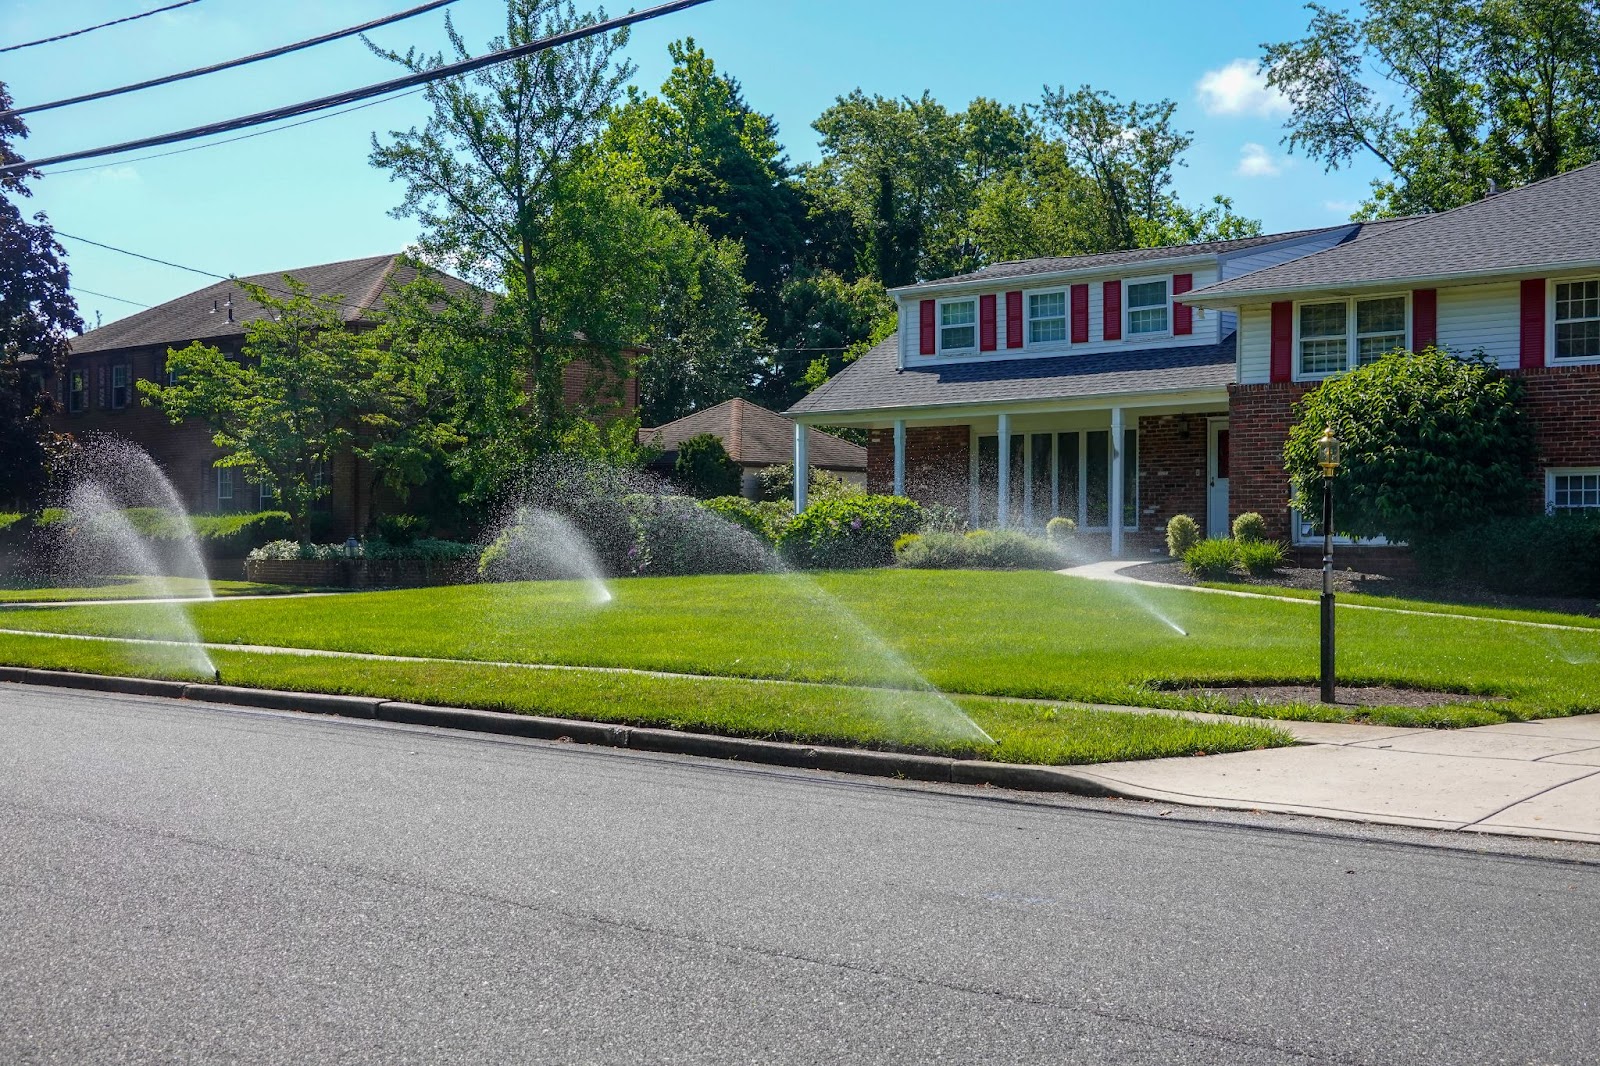 A residential neighborhood with a lawn sprinkler system watering the grass, promoting proper lawn care